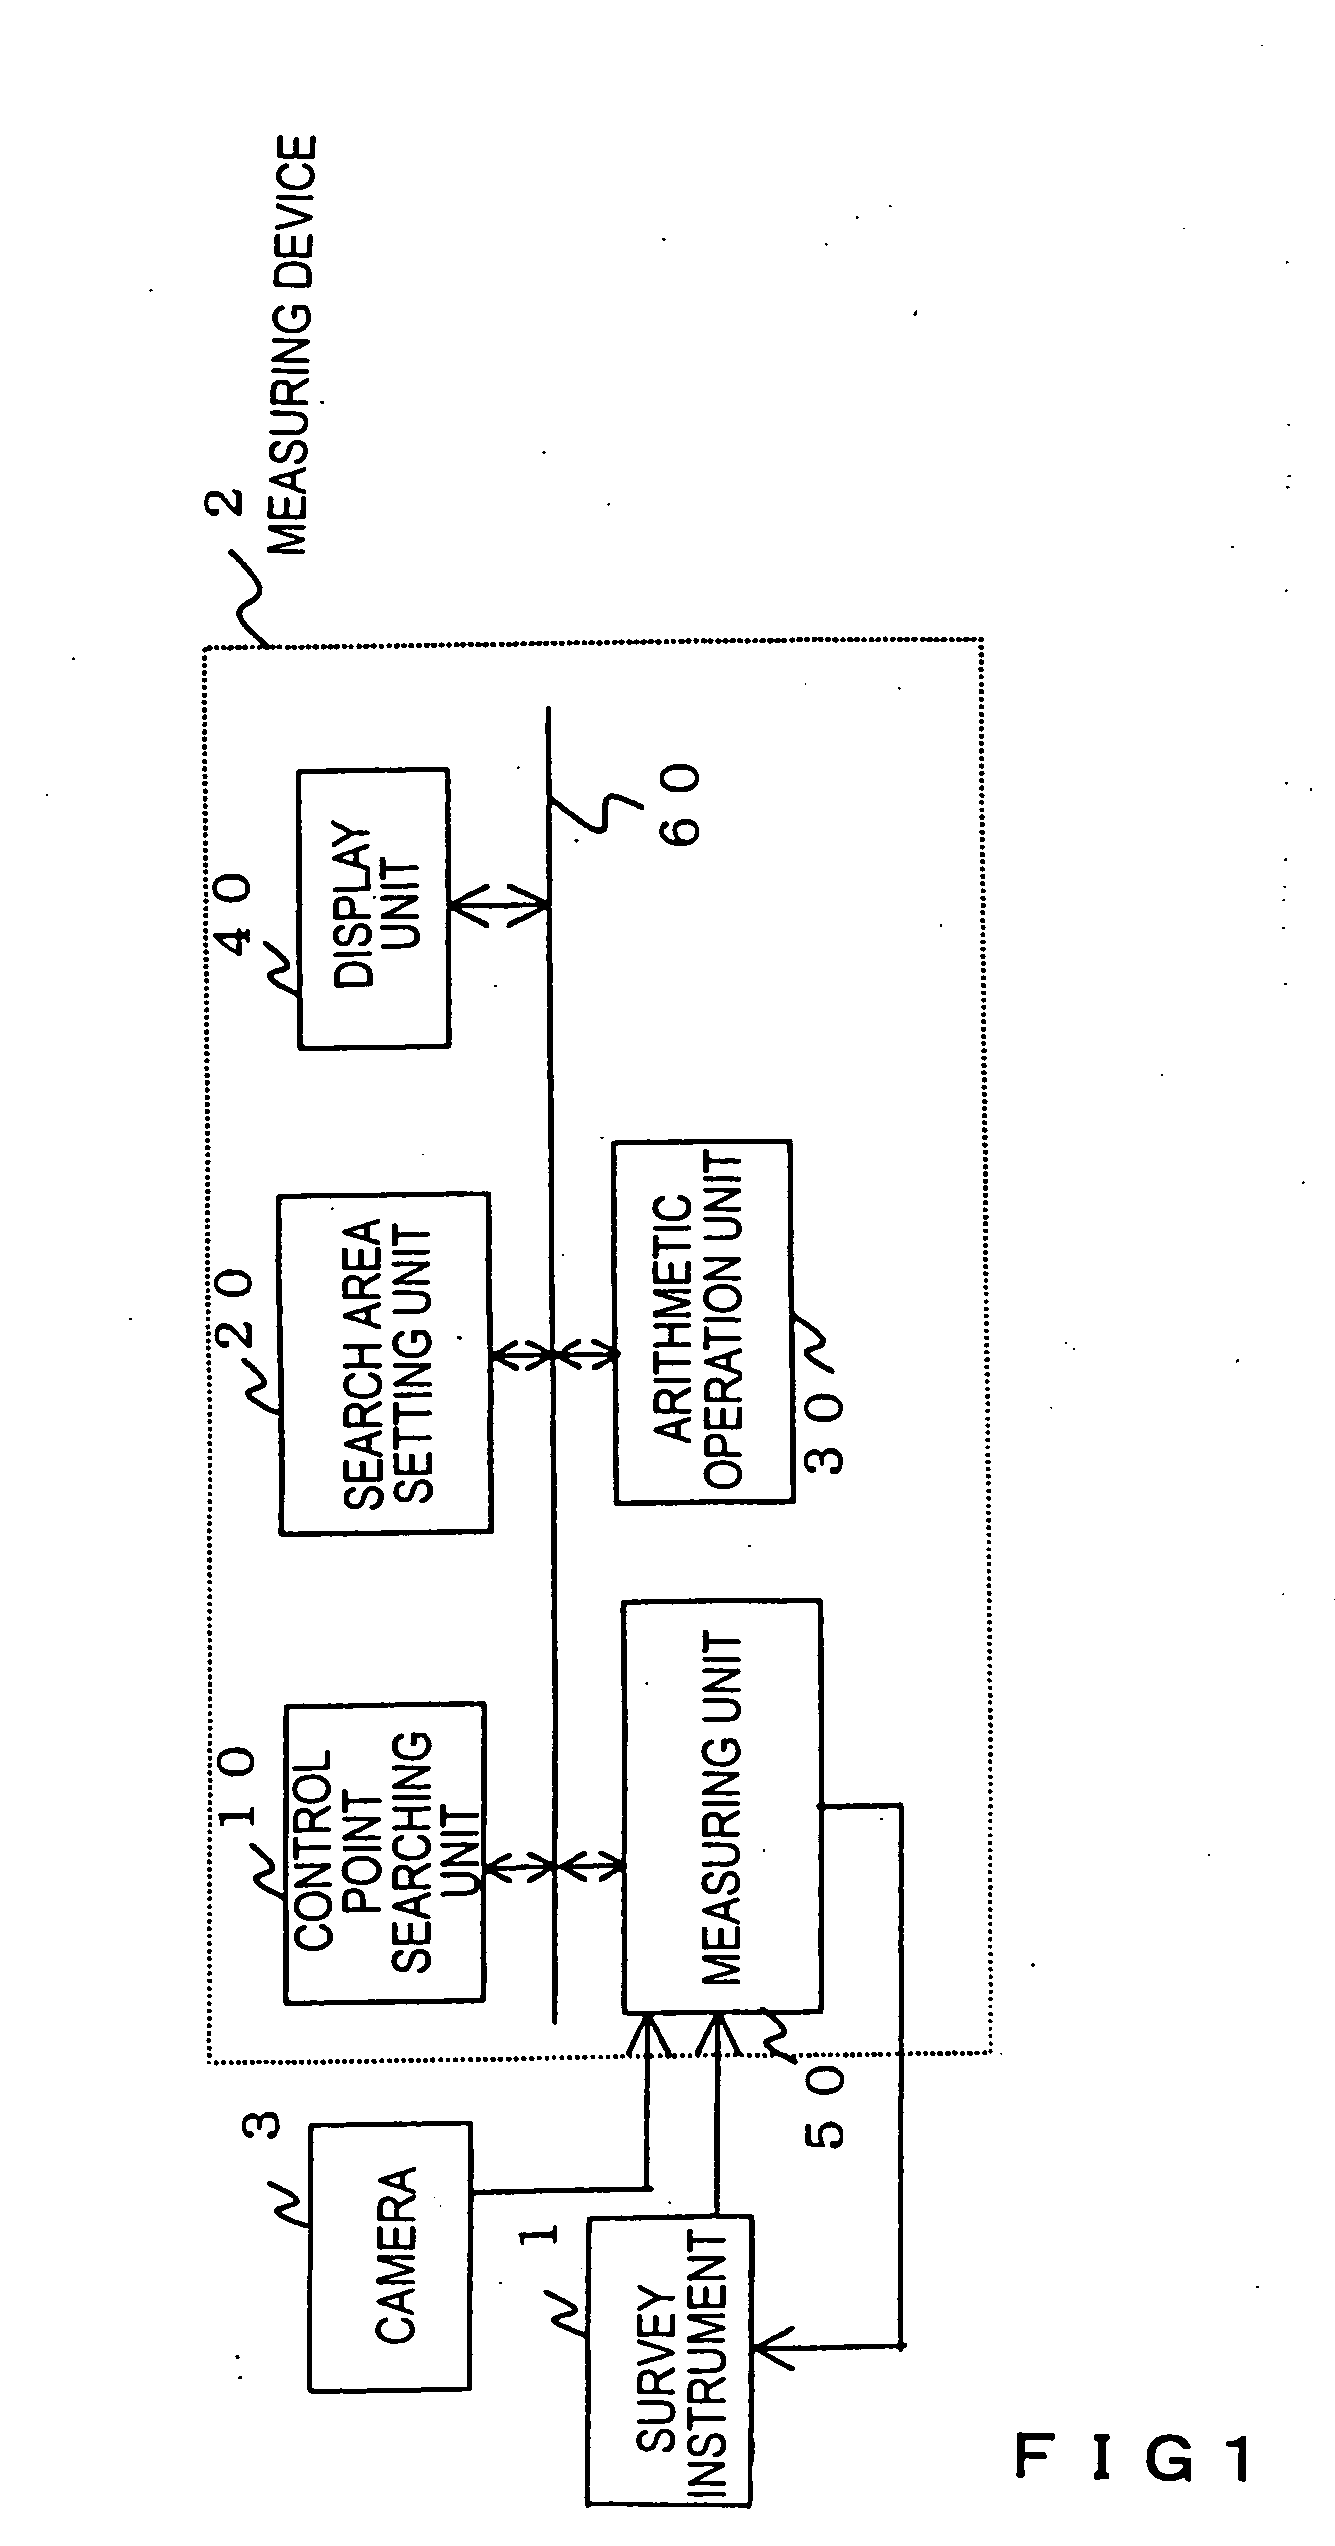 Stereo image measuring device